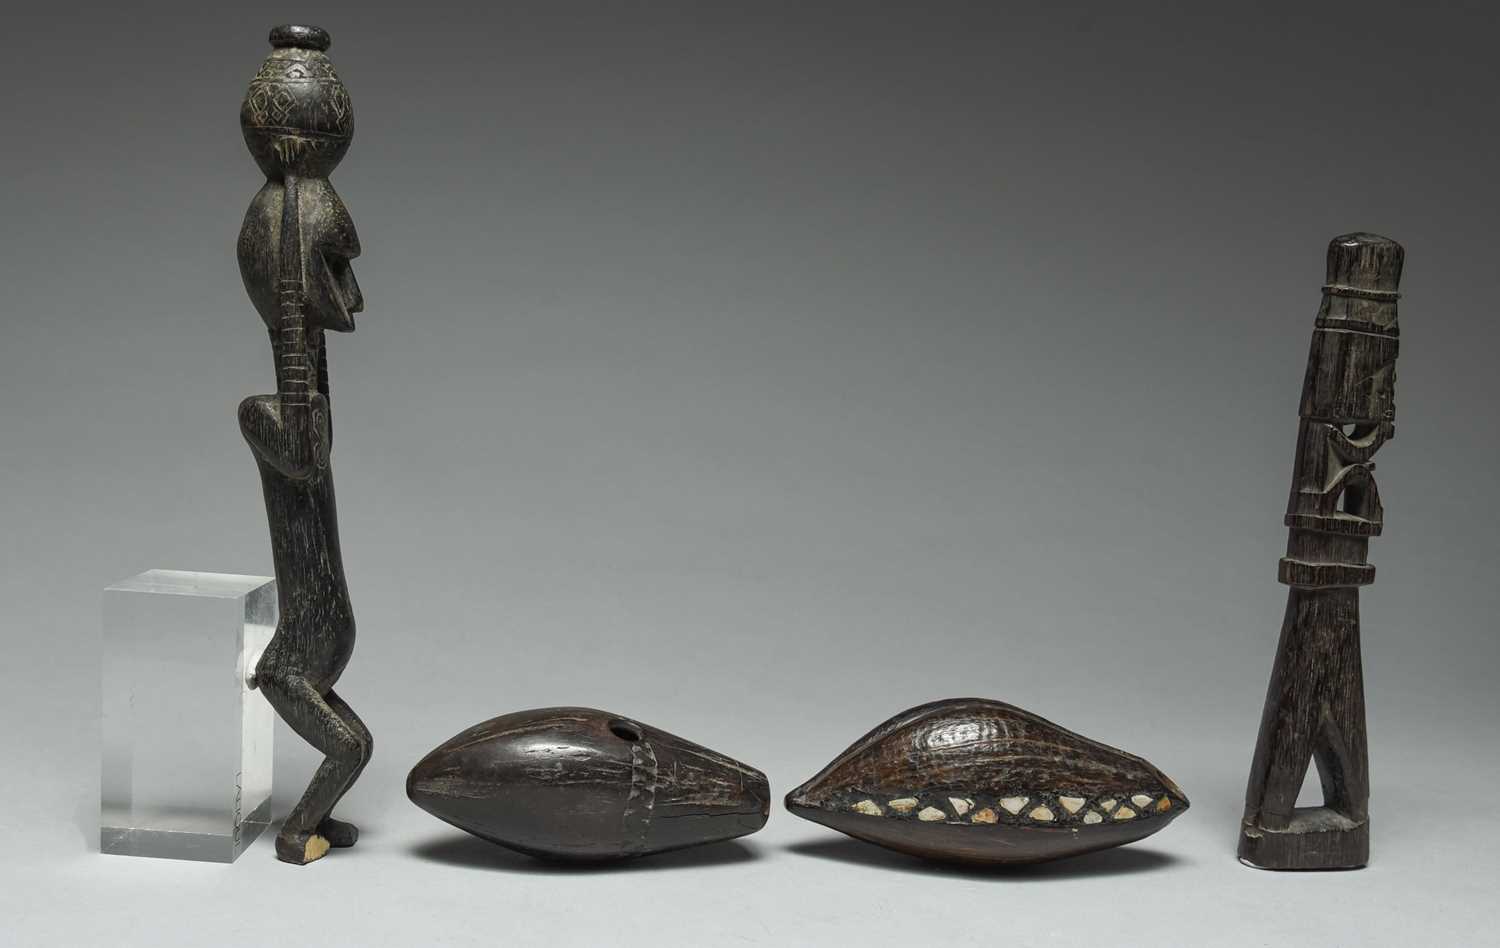 A Korwar float / charm Irian Jaya, Indonesia carved with a seated figure and with an open base, - Image 3 of 4